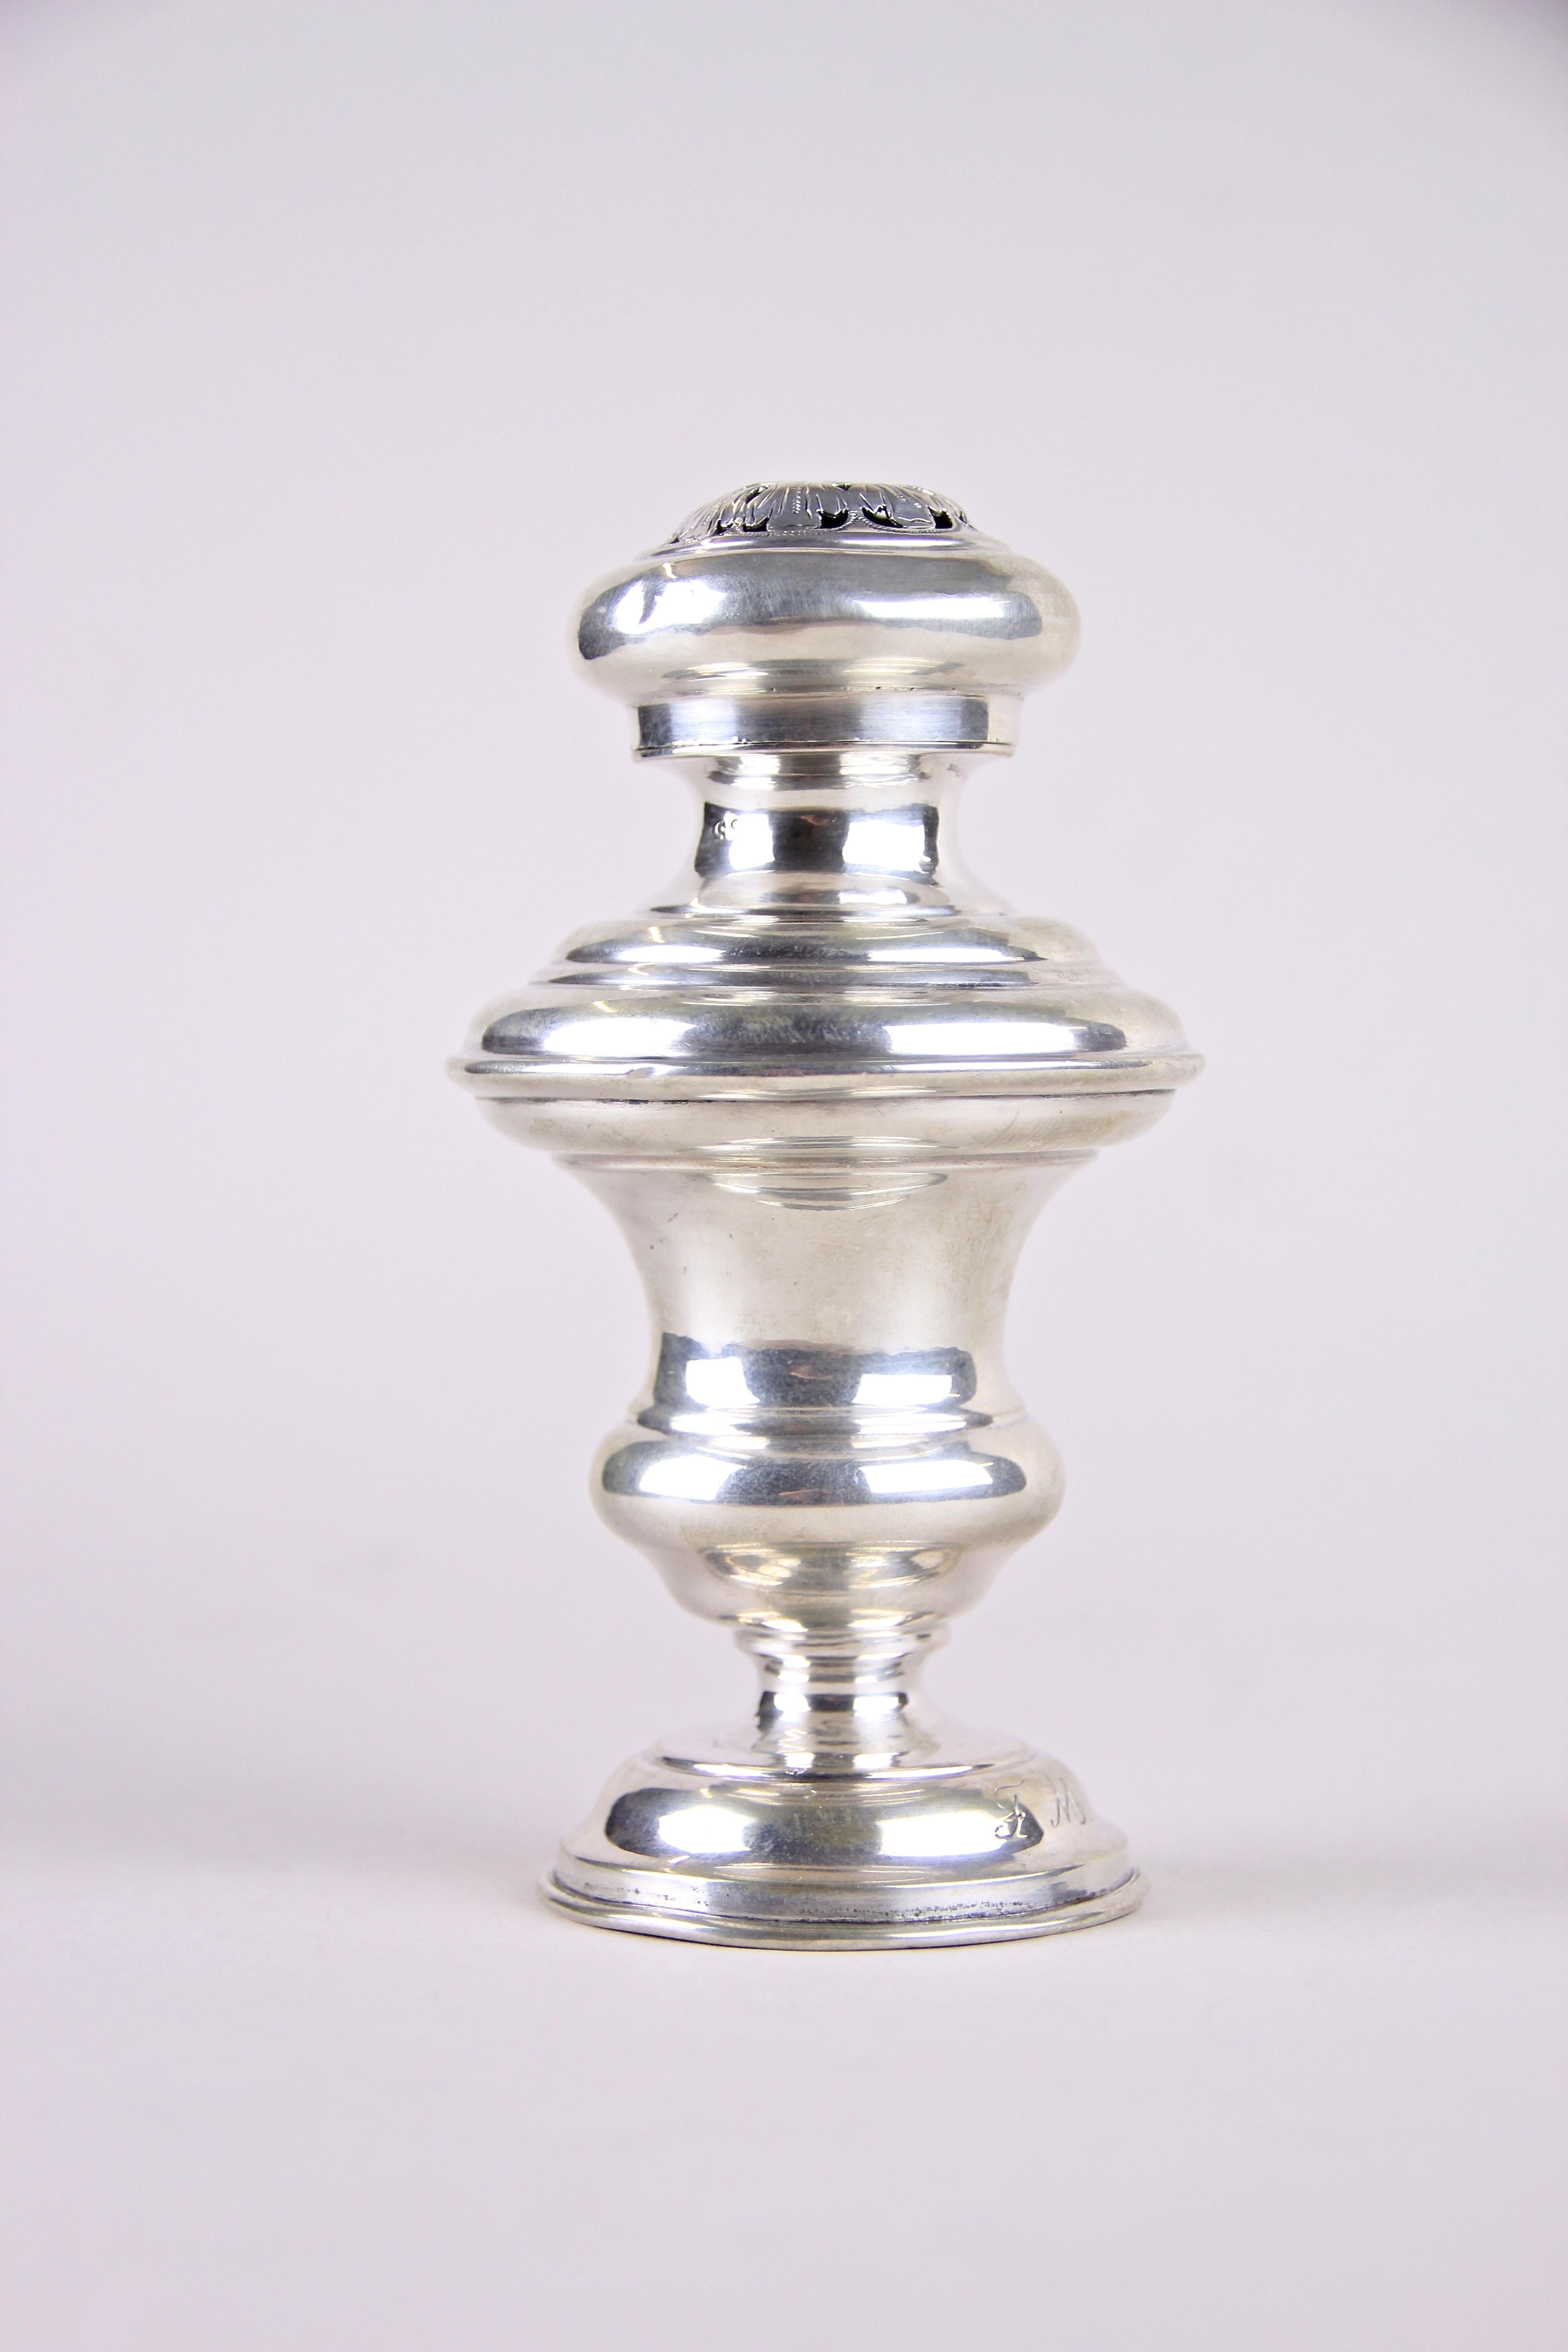 Enchanting silver sugar caster from the mid-19th century in Austria. This inventive shaped sugar caster was made out of 13 Lot silver, means Classic 812 silver. The beautiful designed cap can be lowered for refilling. This masterpiece was hallmarked